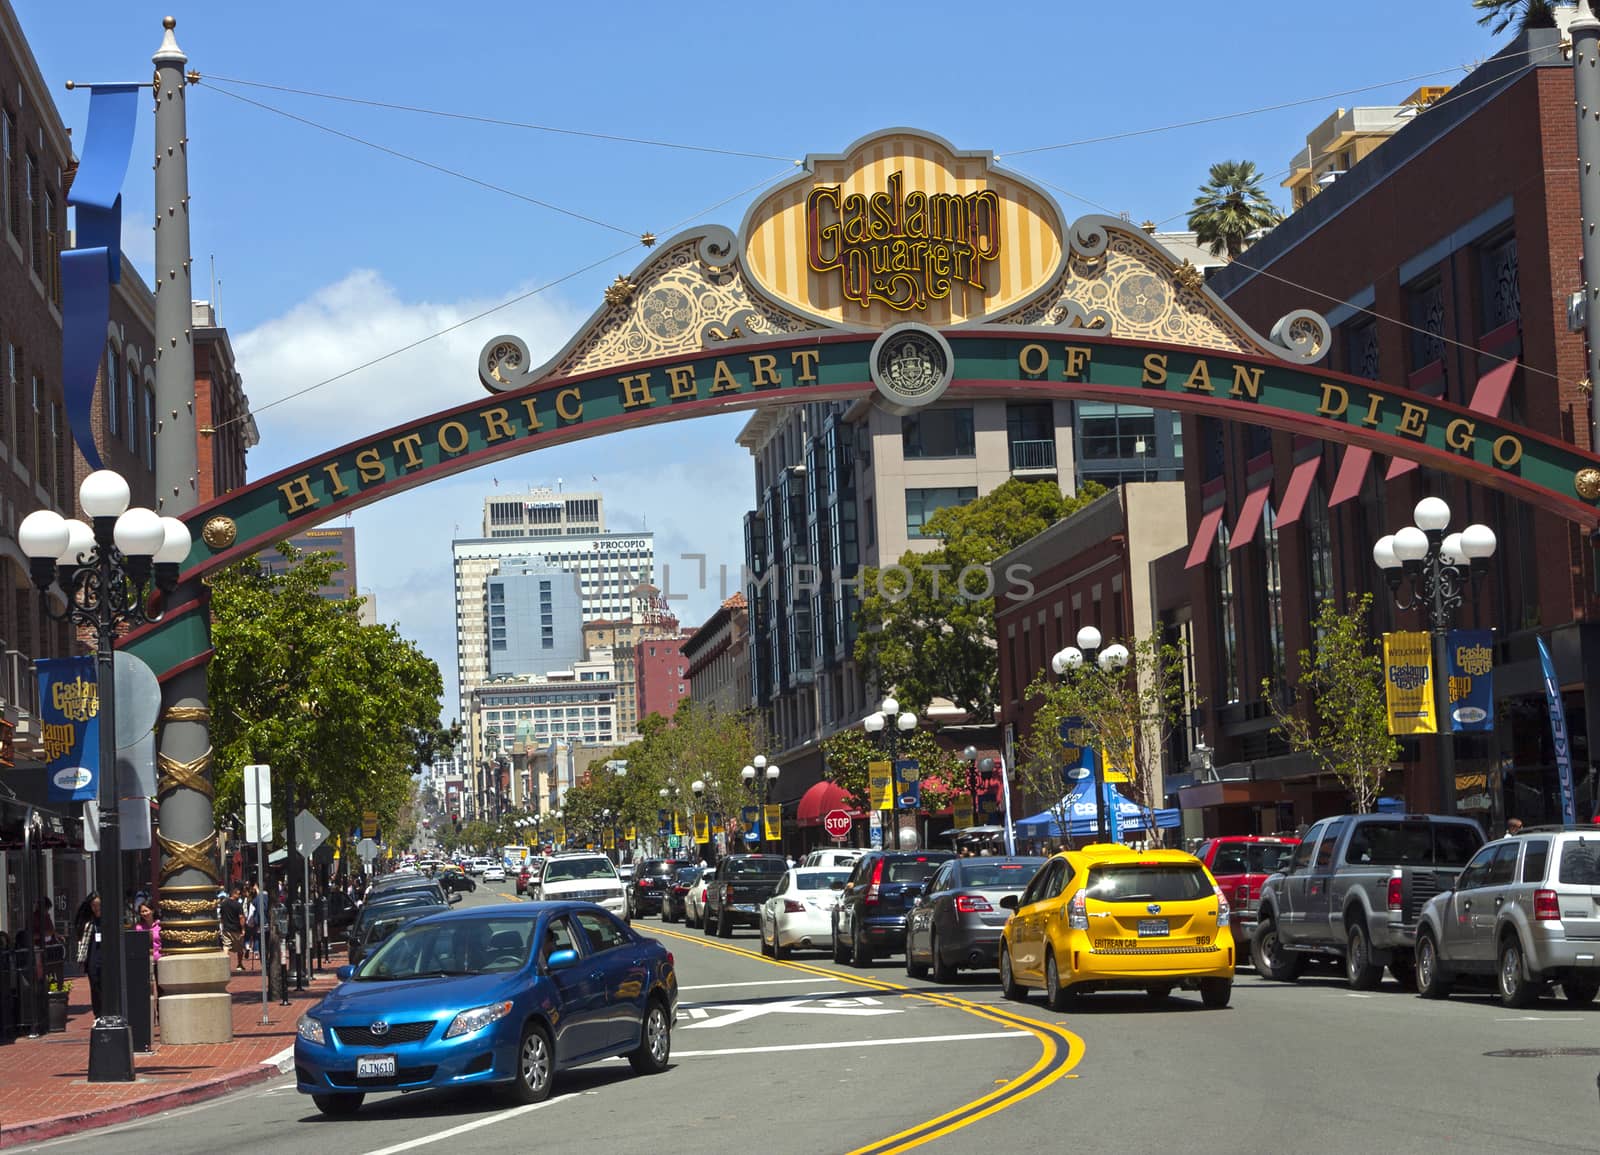 SAN DIEGO , CA - APRIL 27 :Historic heart of San Diego, California, on April 27, 2014. Historical district, features a bustling entertainment scene with bars and restaurants.